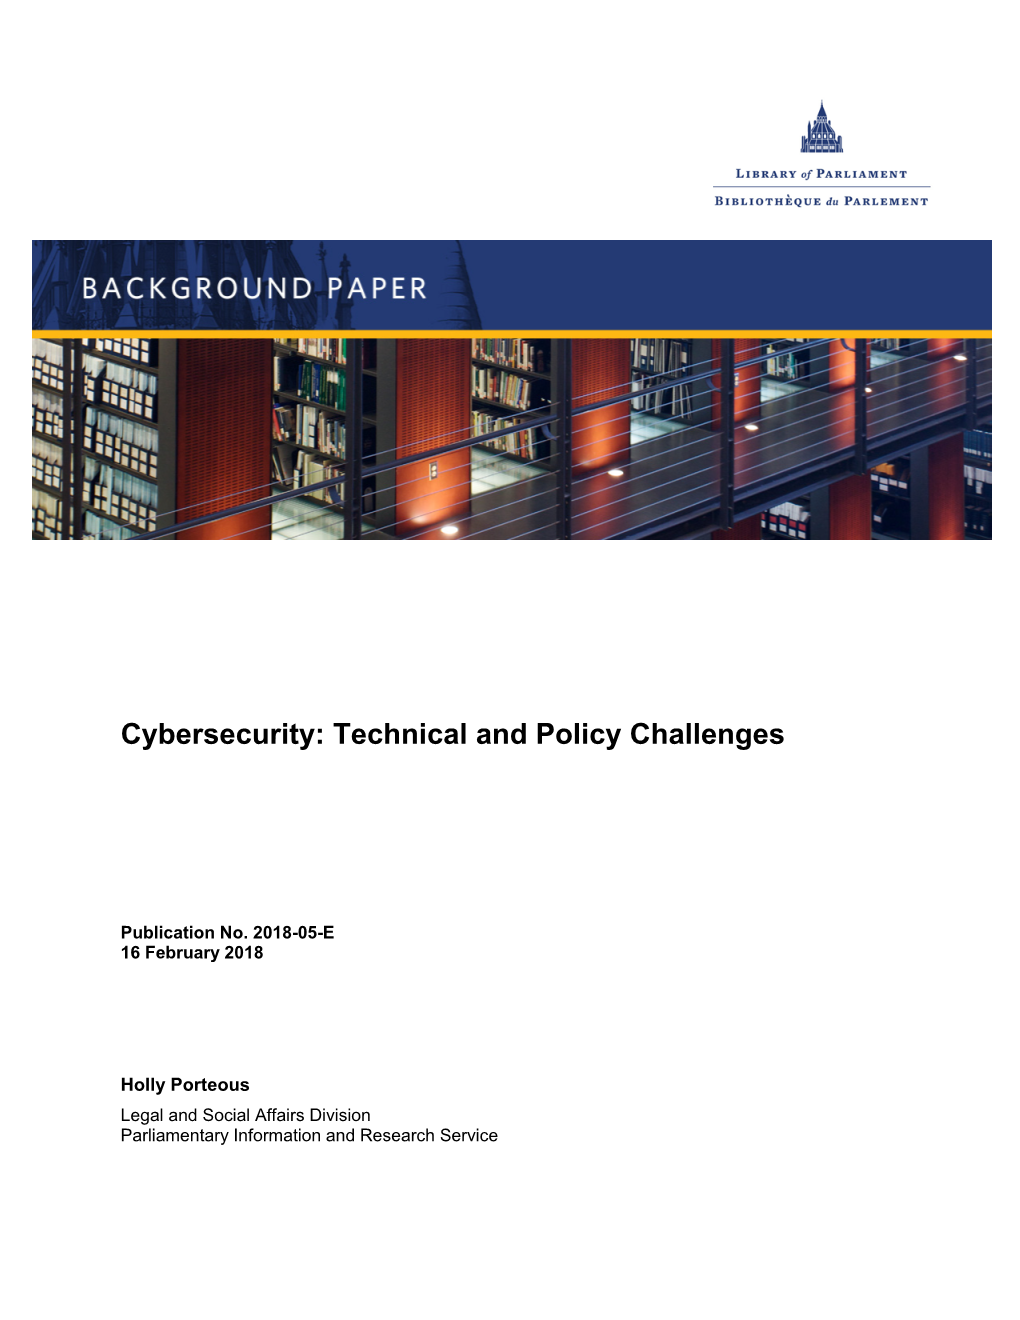 Cybersecurity: Technical and Policy Challenges